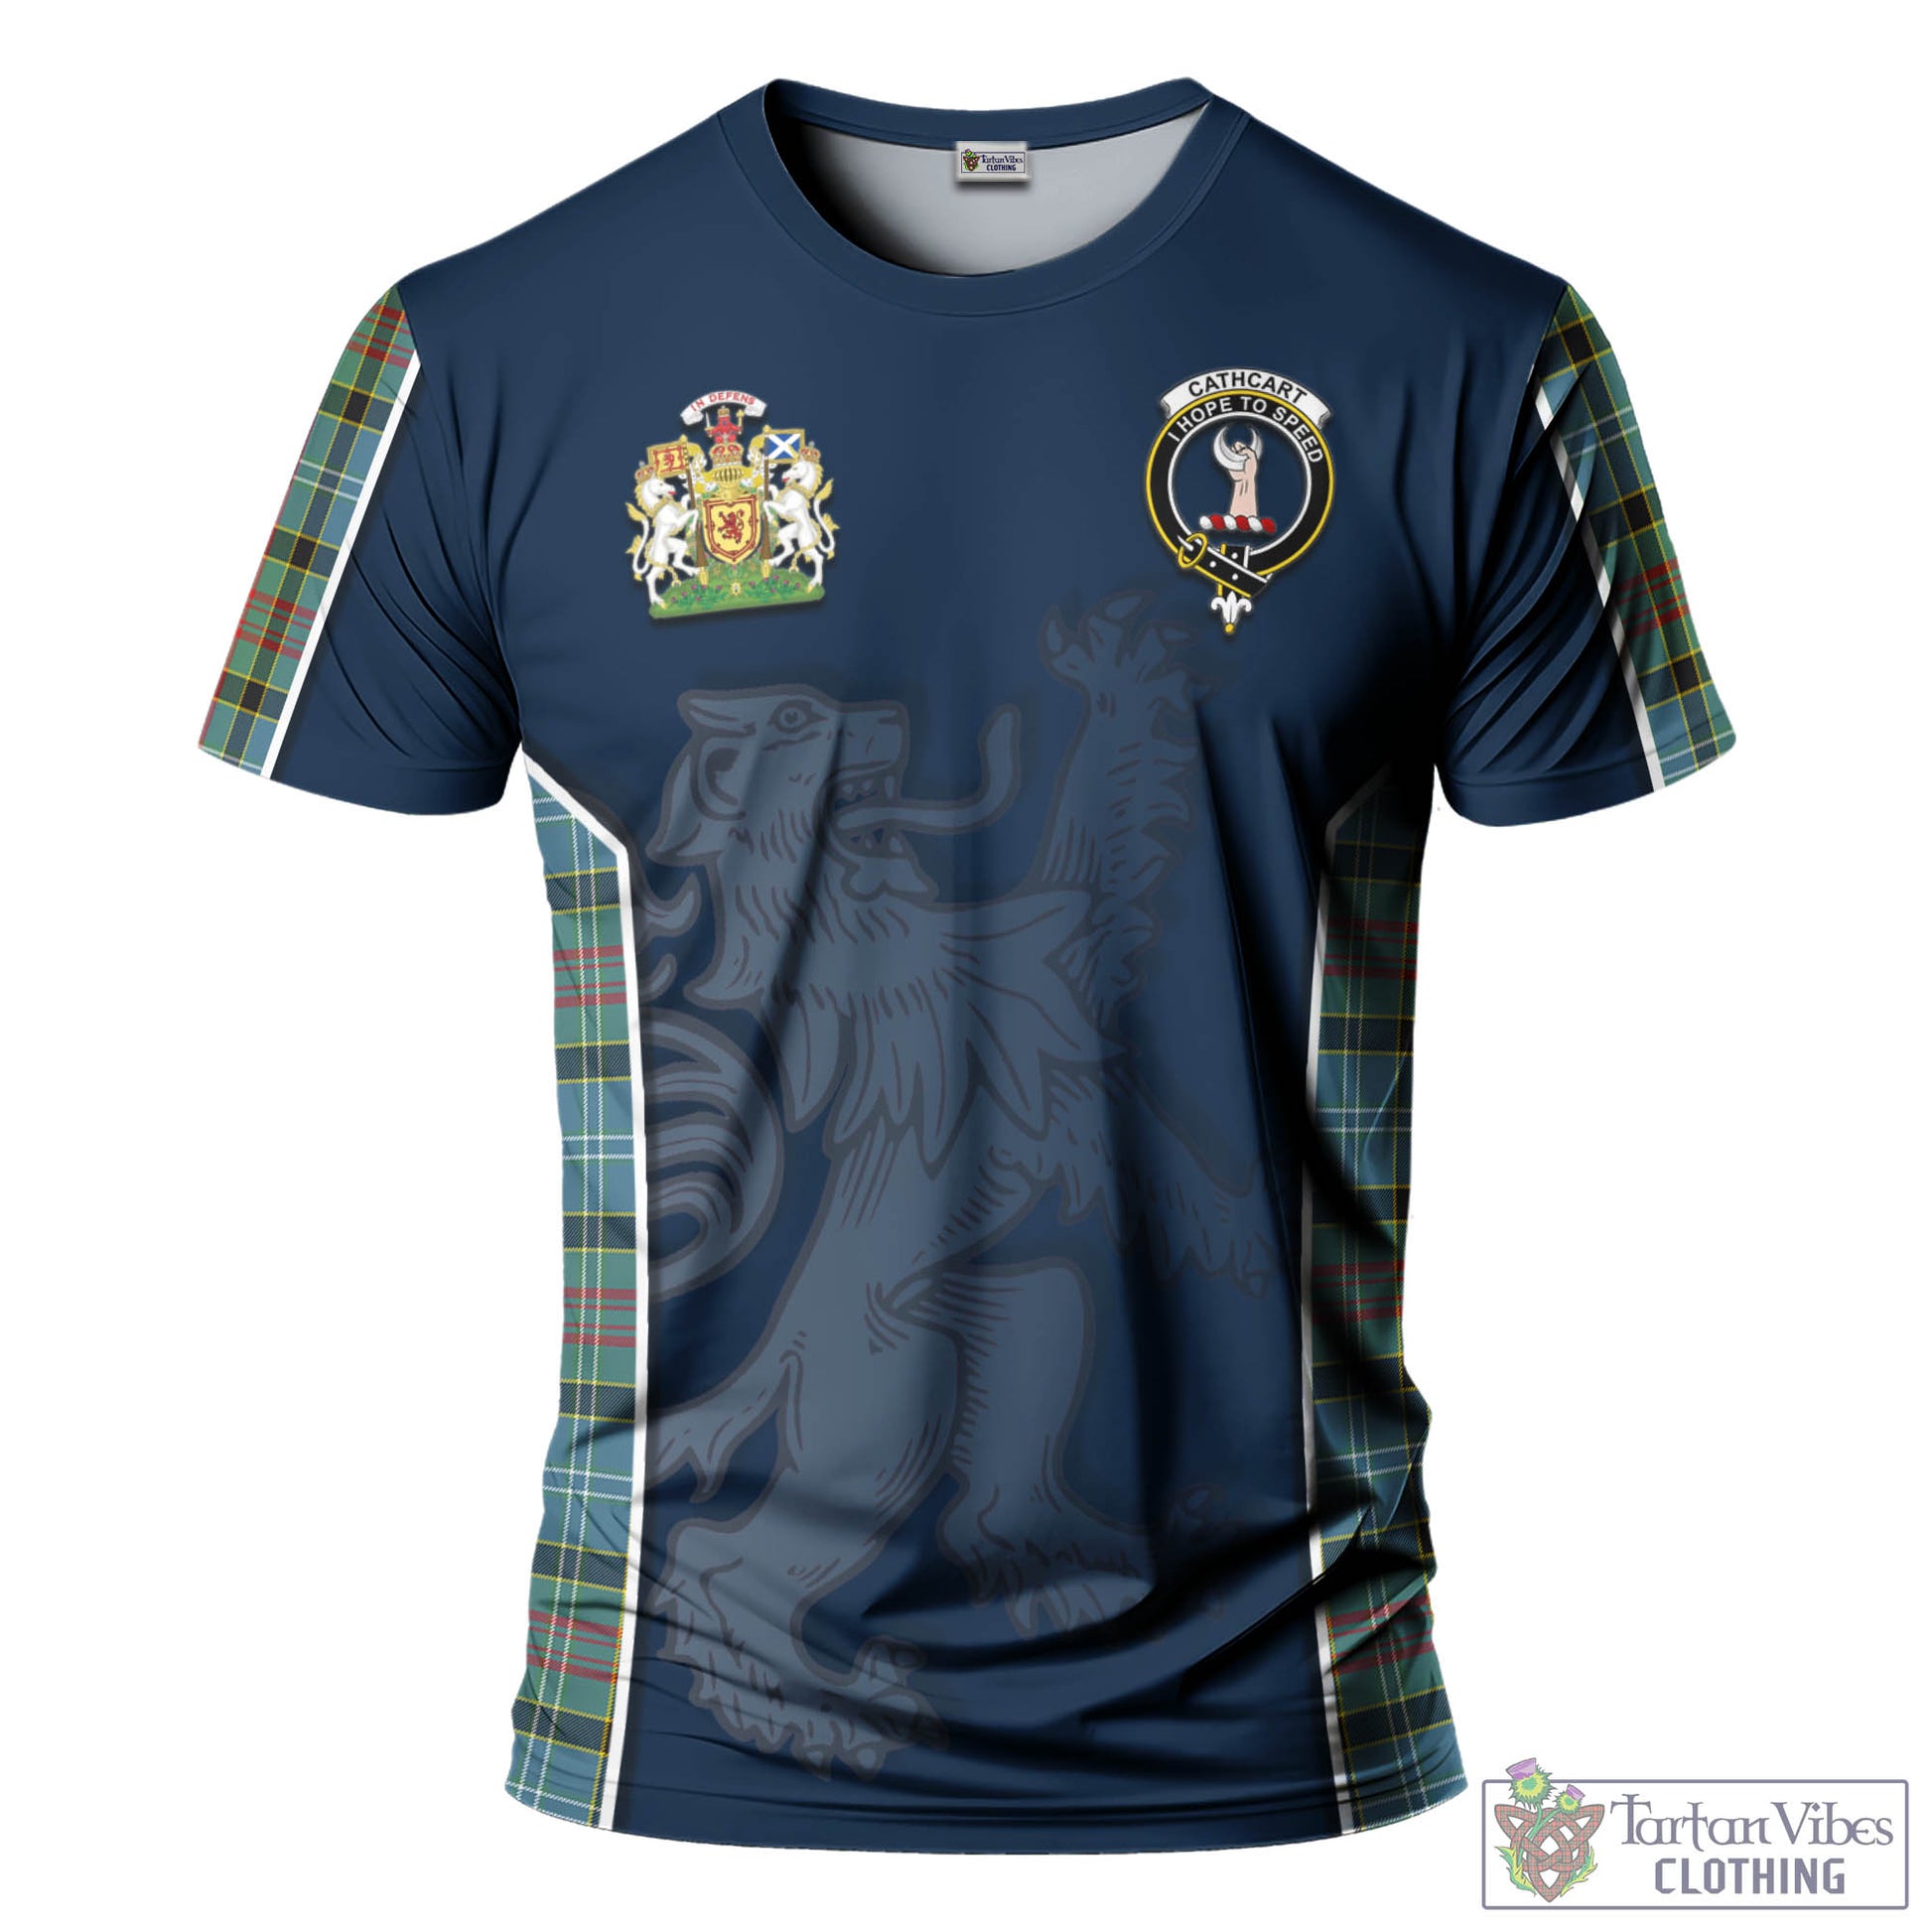 Tartan Vibes Clothing Cathcart Tartan T-Shirt with Family Crest and Lion Rampant Vibes Sport Style